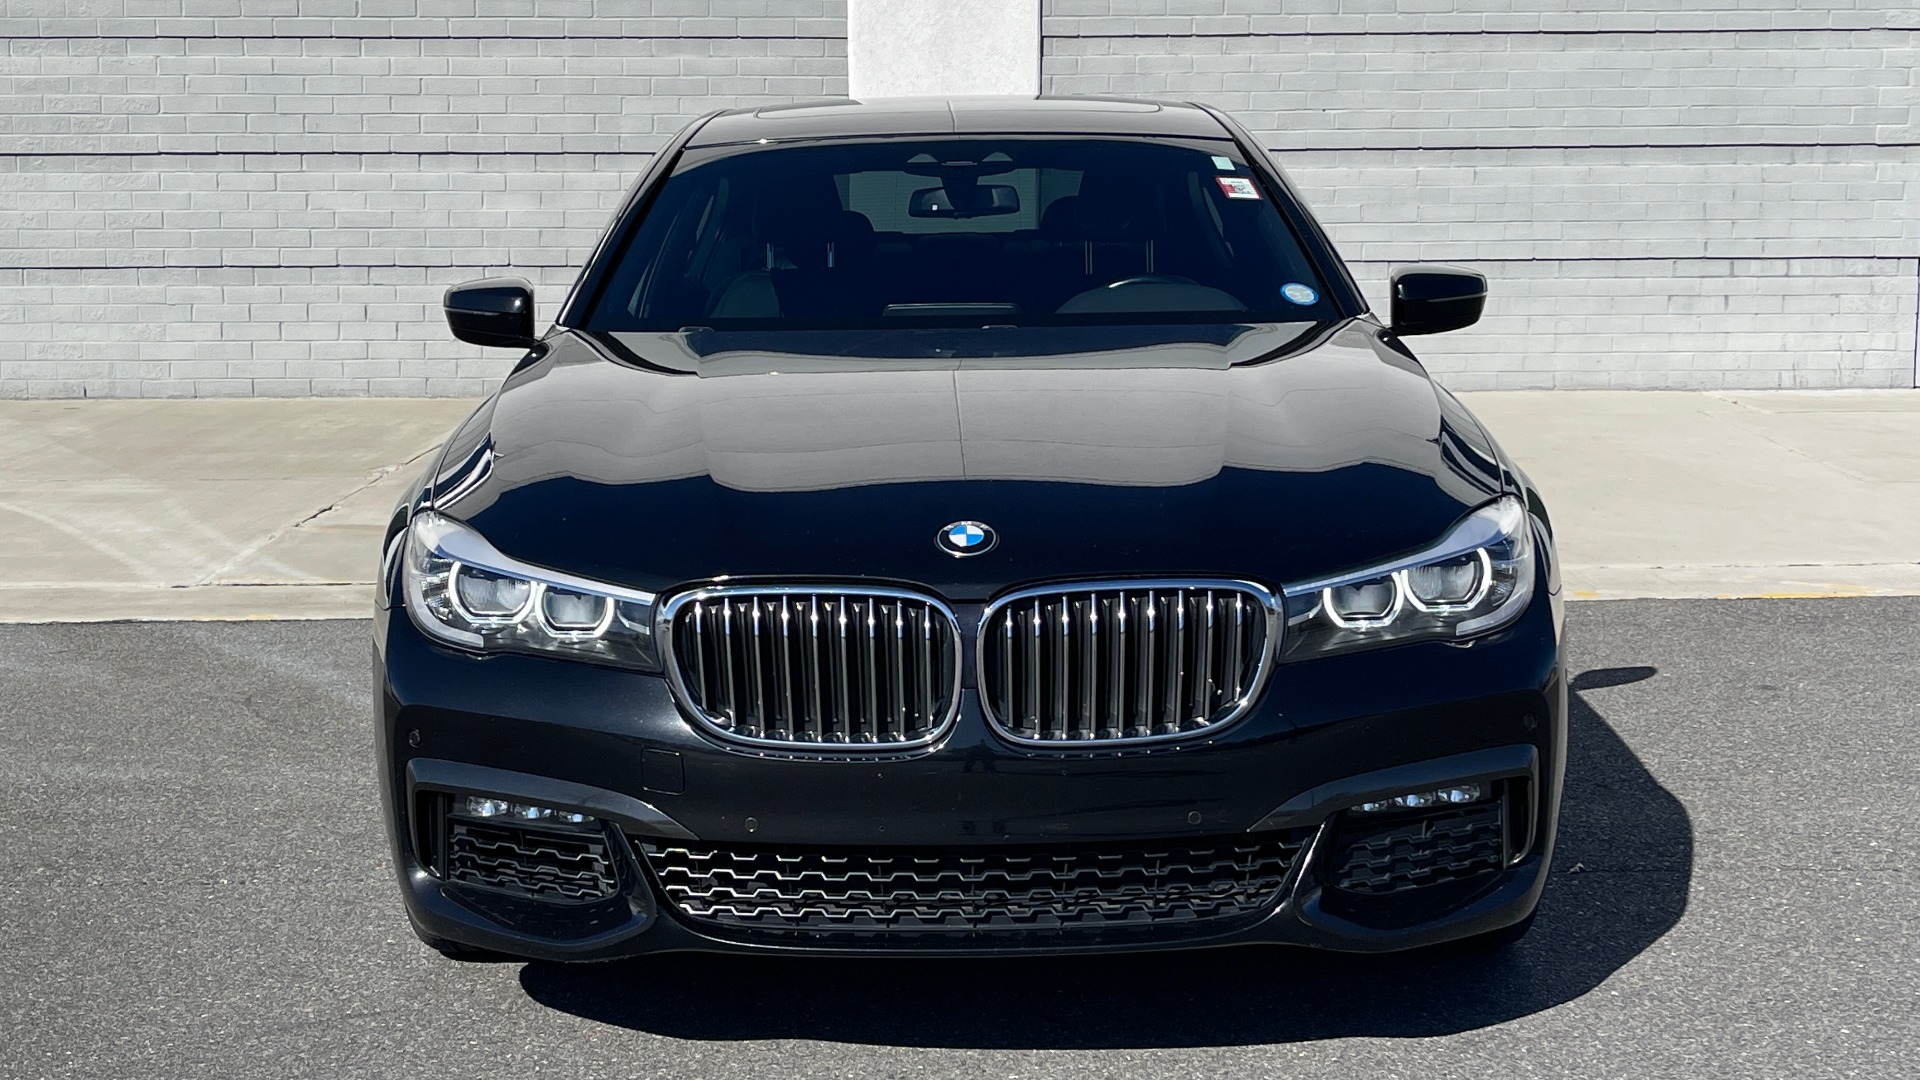 Used 2019 BMW 7 SERIES 740I XDRIVE M-SPORT / CLD WTHR / NAV / SUNROOF / REARVIEW / 22IN WHLS for sale Sold at Formula Imports in Charlotte NC 28227 15